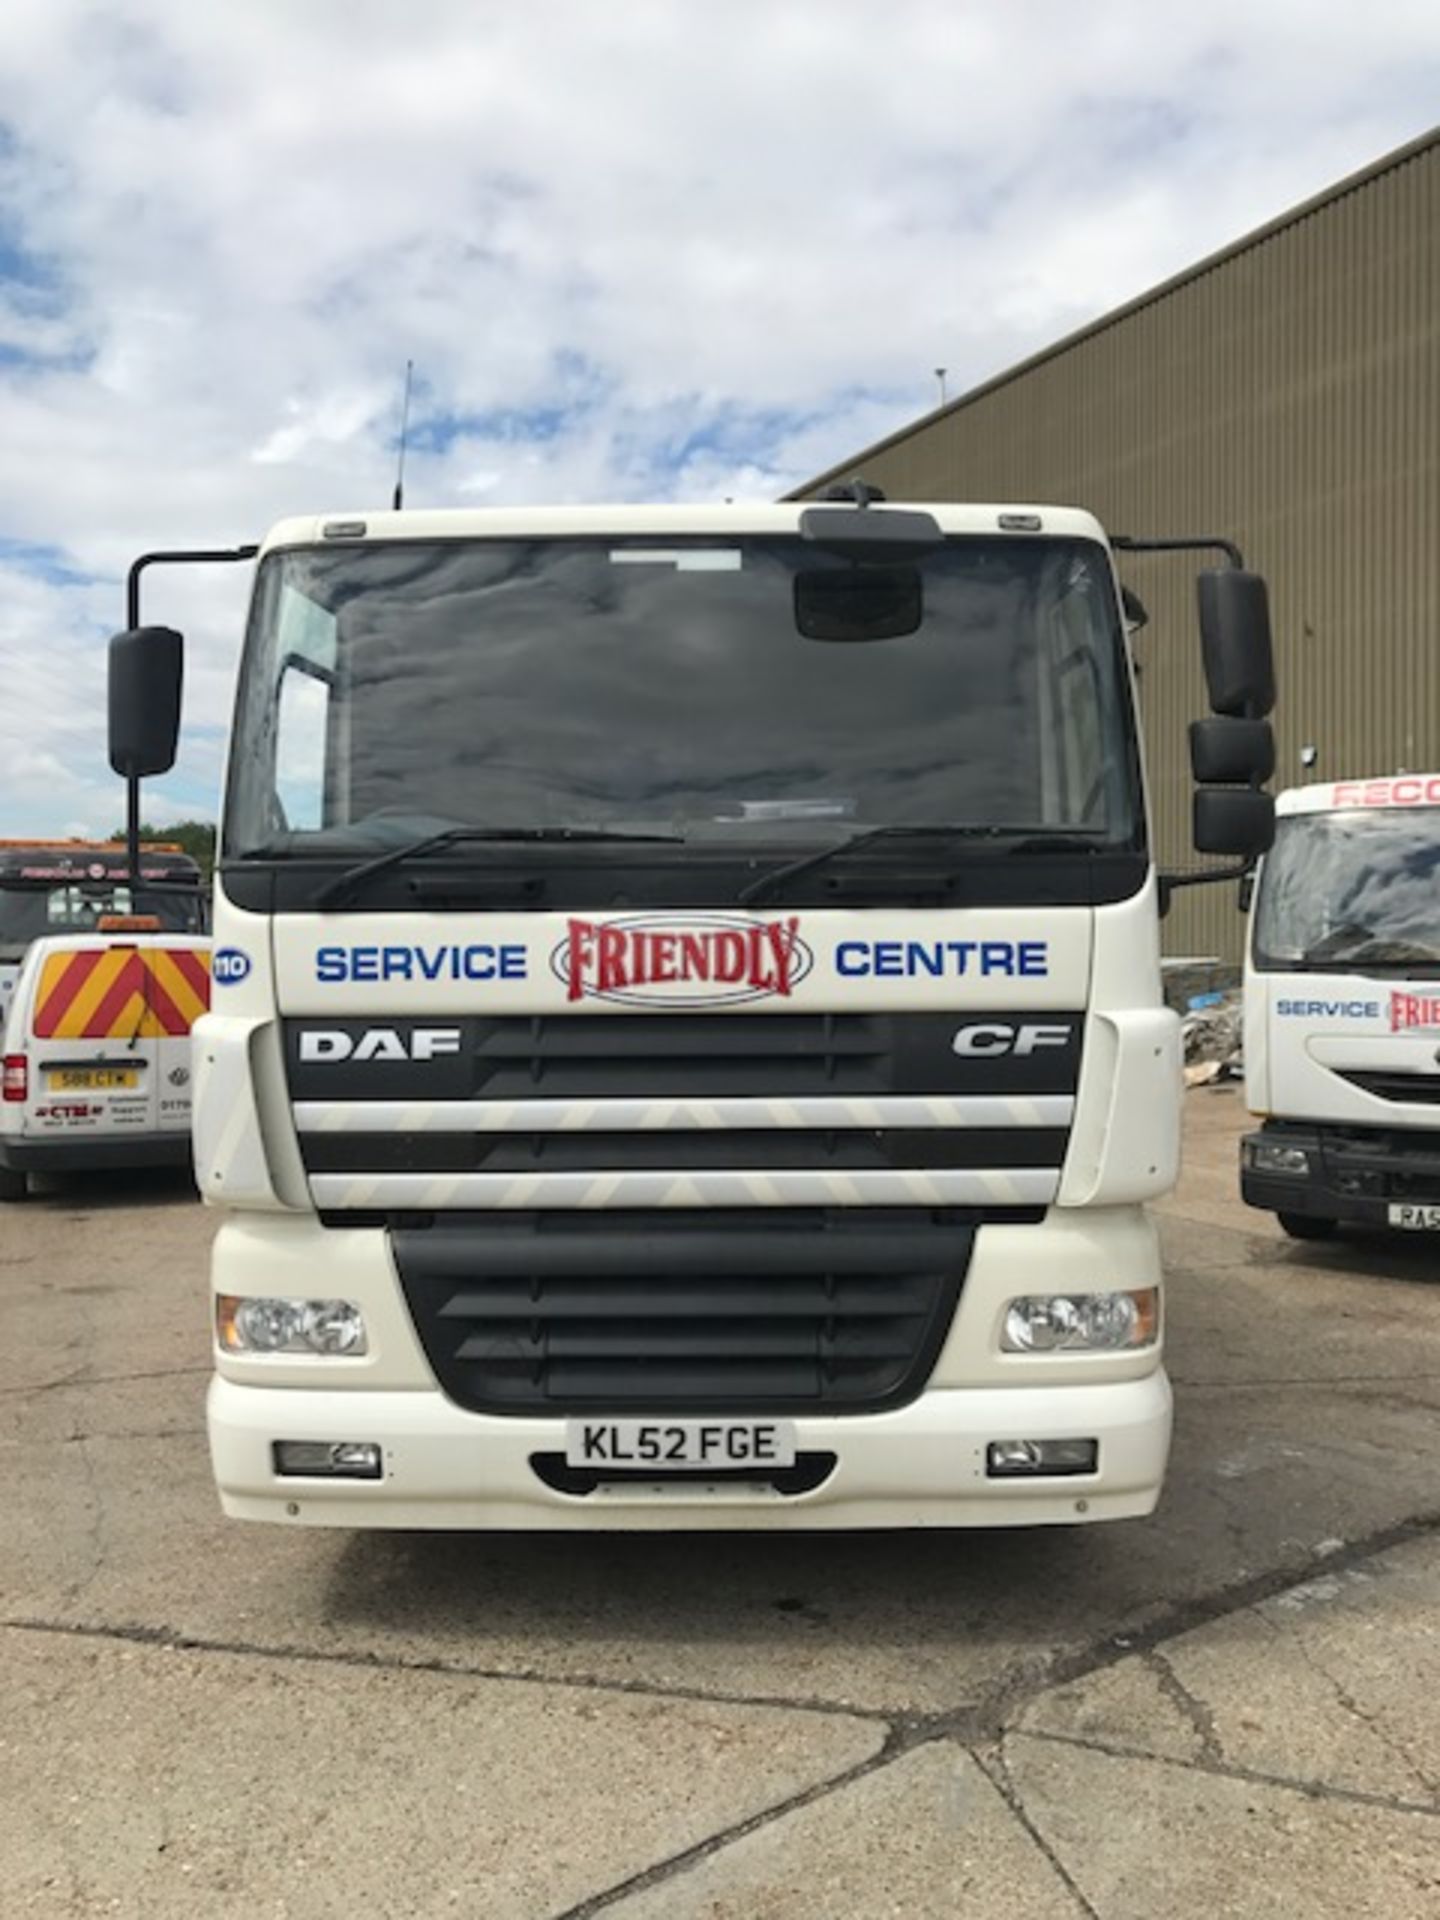 2003 DAF CF85 34018T sleeper cab breakdown recovery vehicle complete with Roger Dyson Group body and - Image 3 of 27